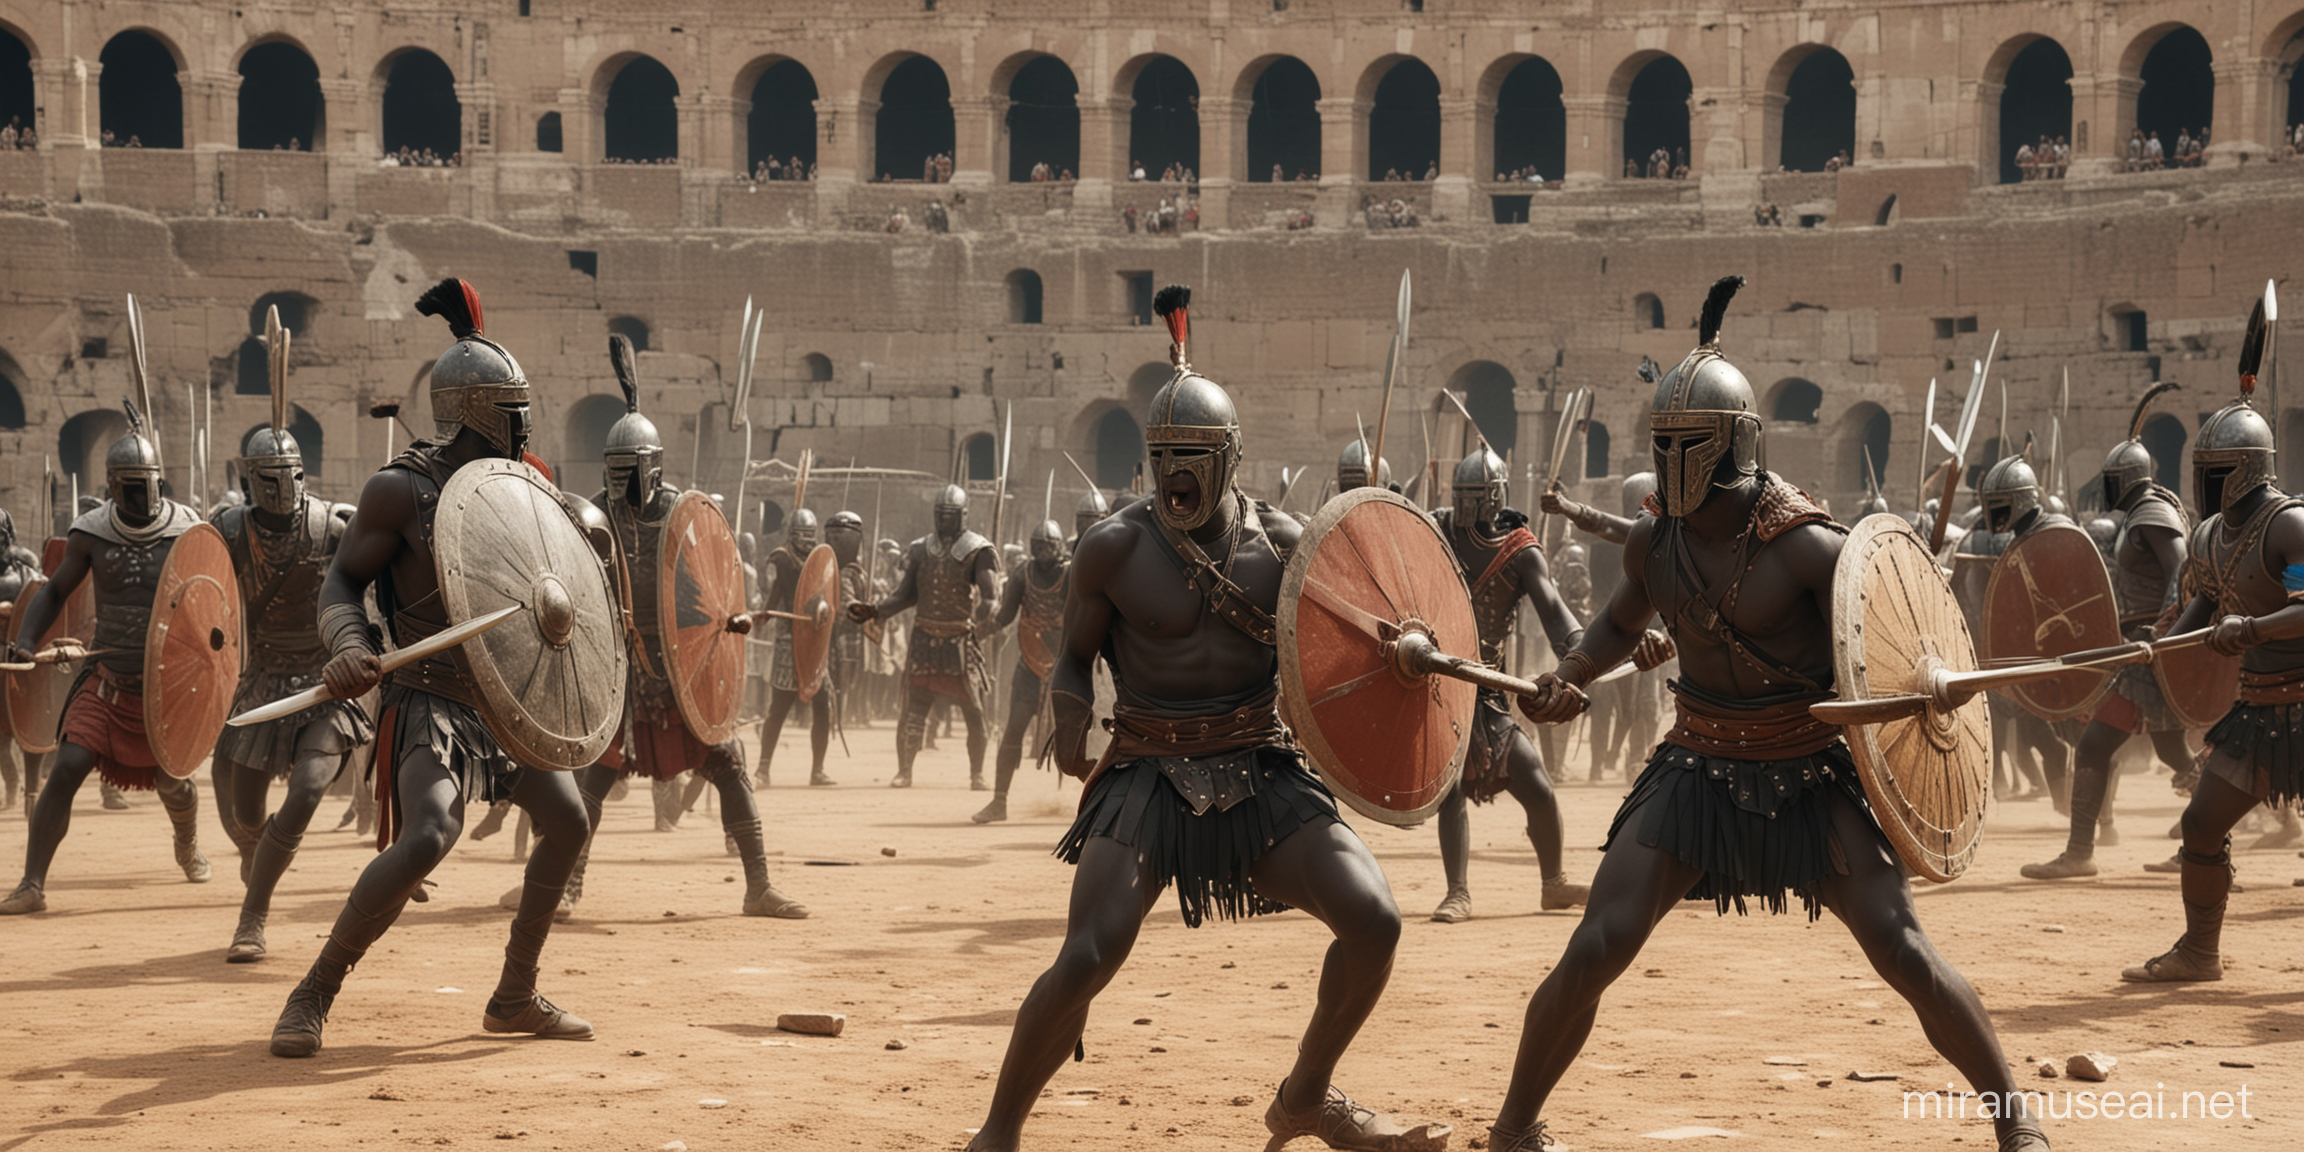 group of Nuer warriors fighting in colosseum against european barbarians